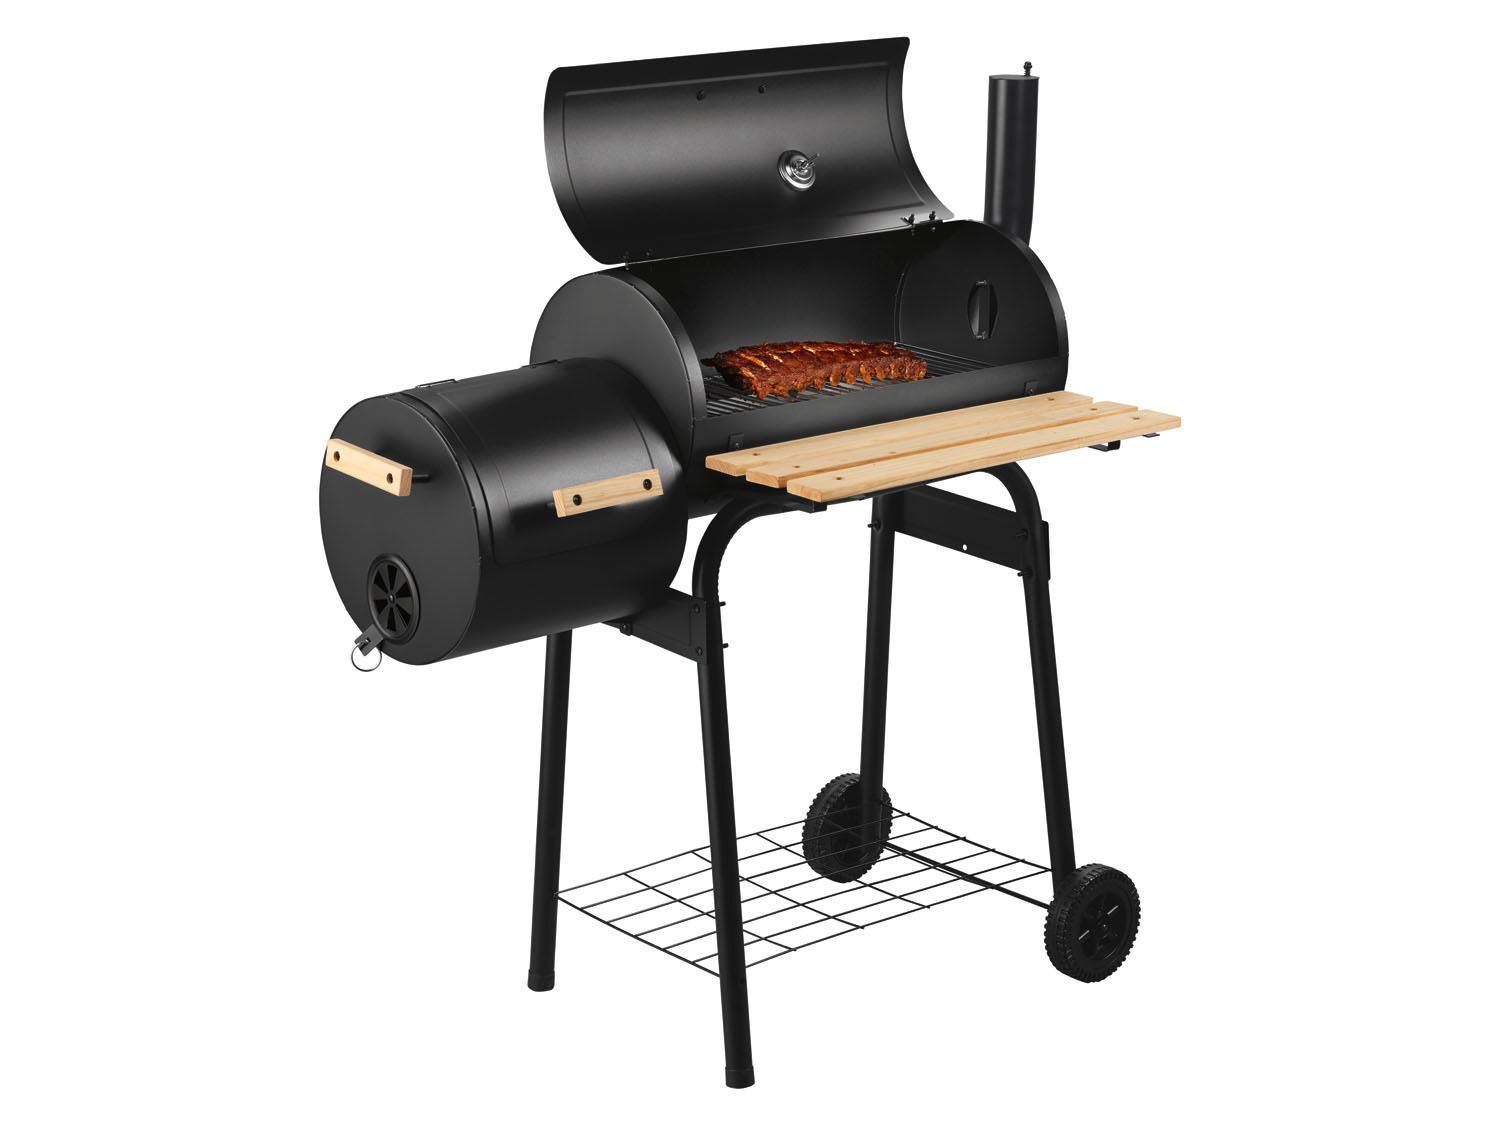 GRILLMEISTER Holzkohle-Smokergrill »GMS 92 A1«, se… mit